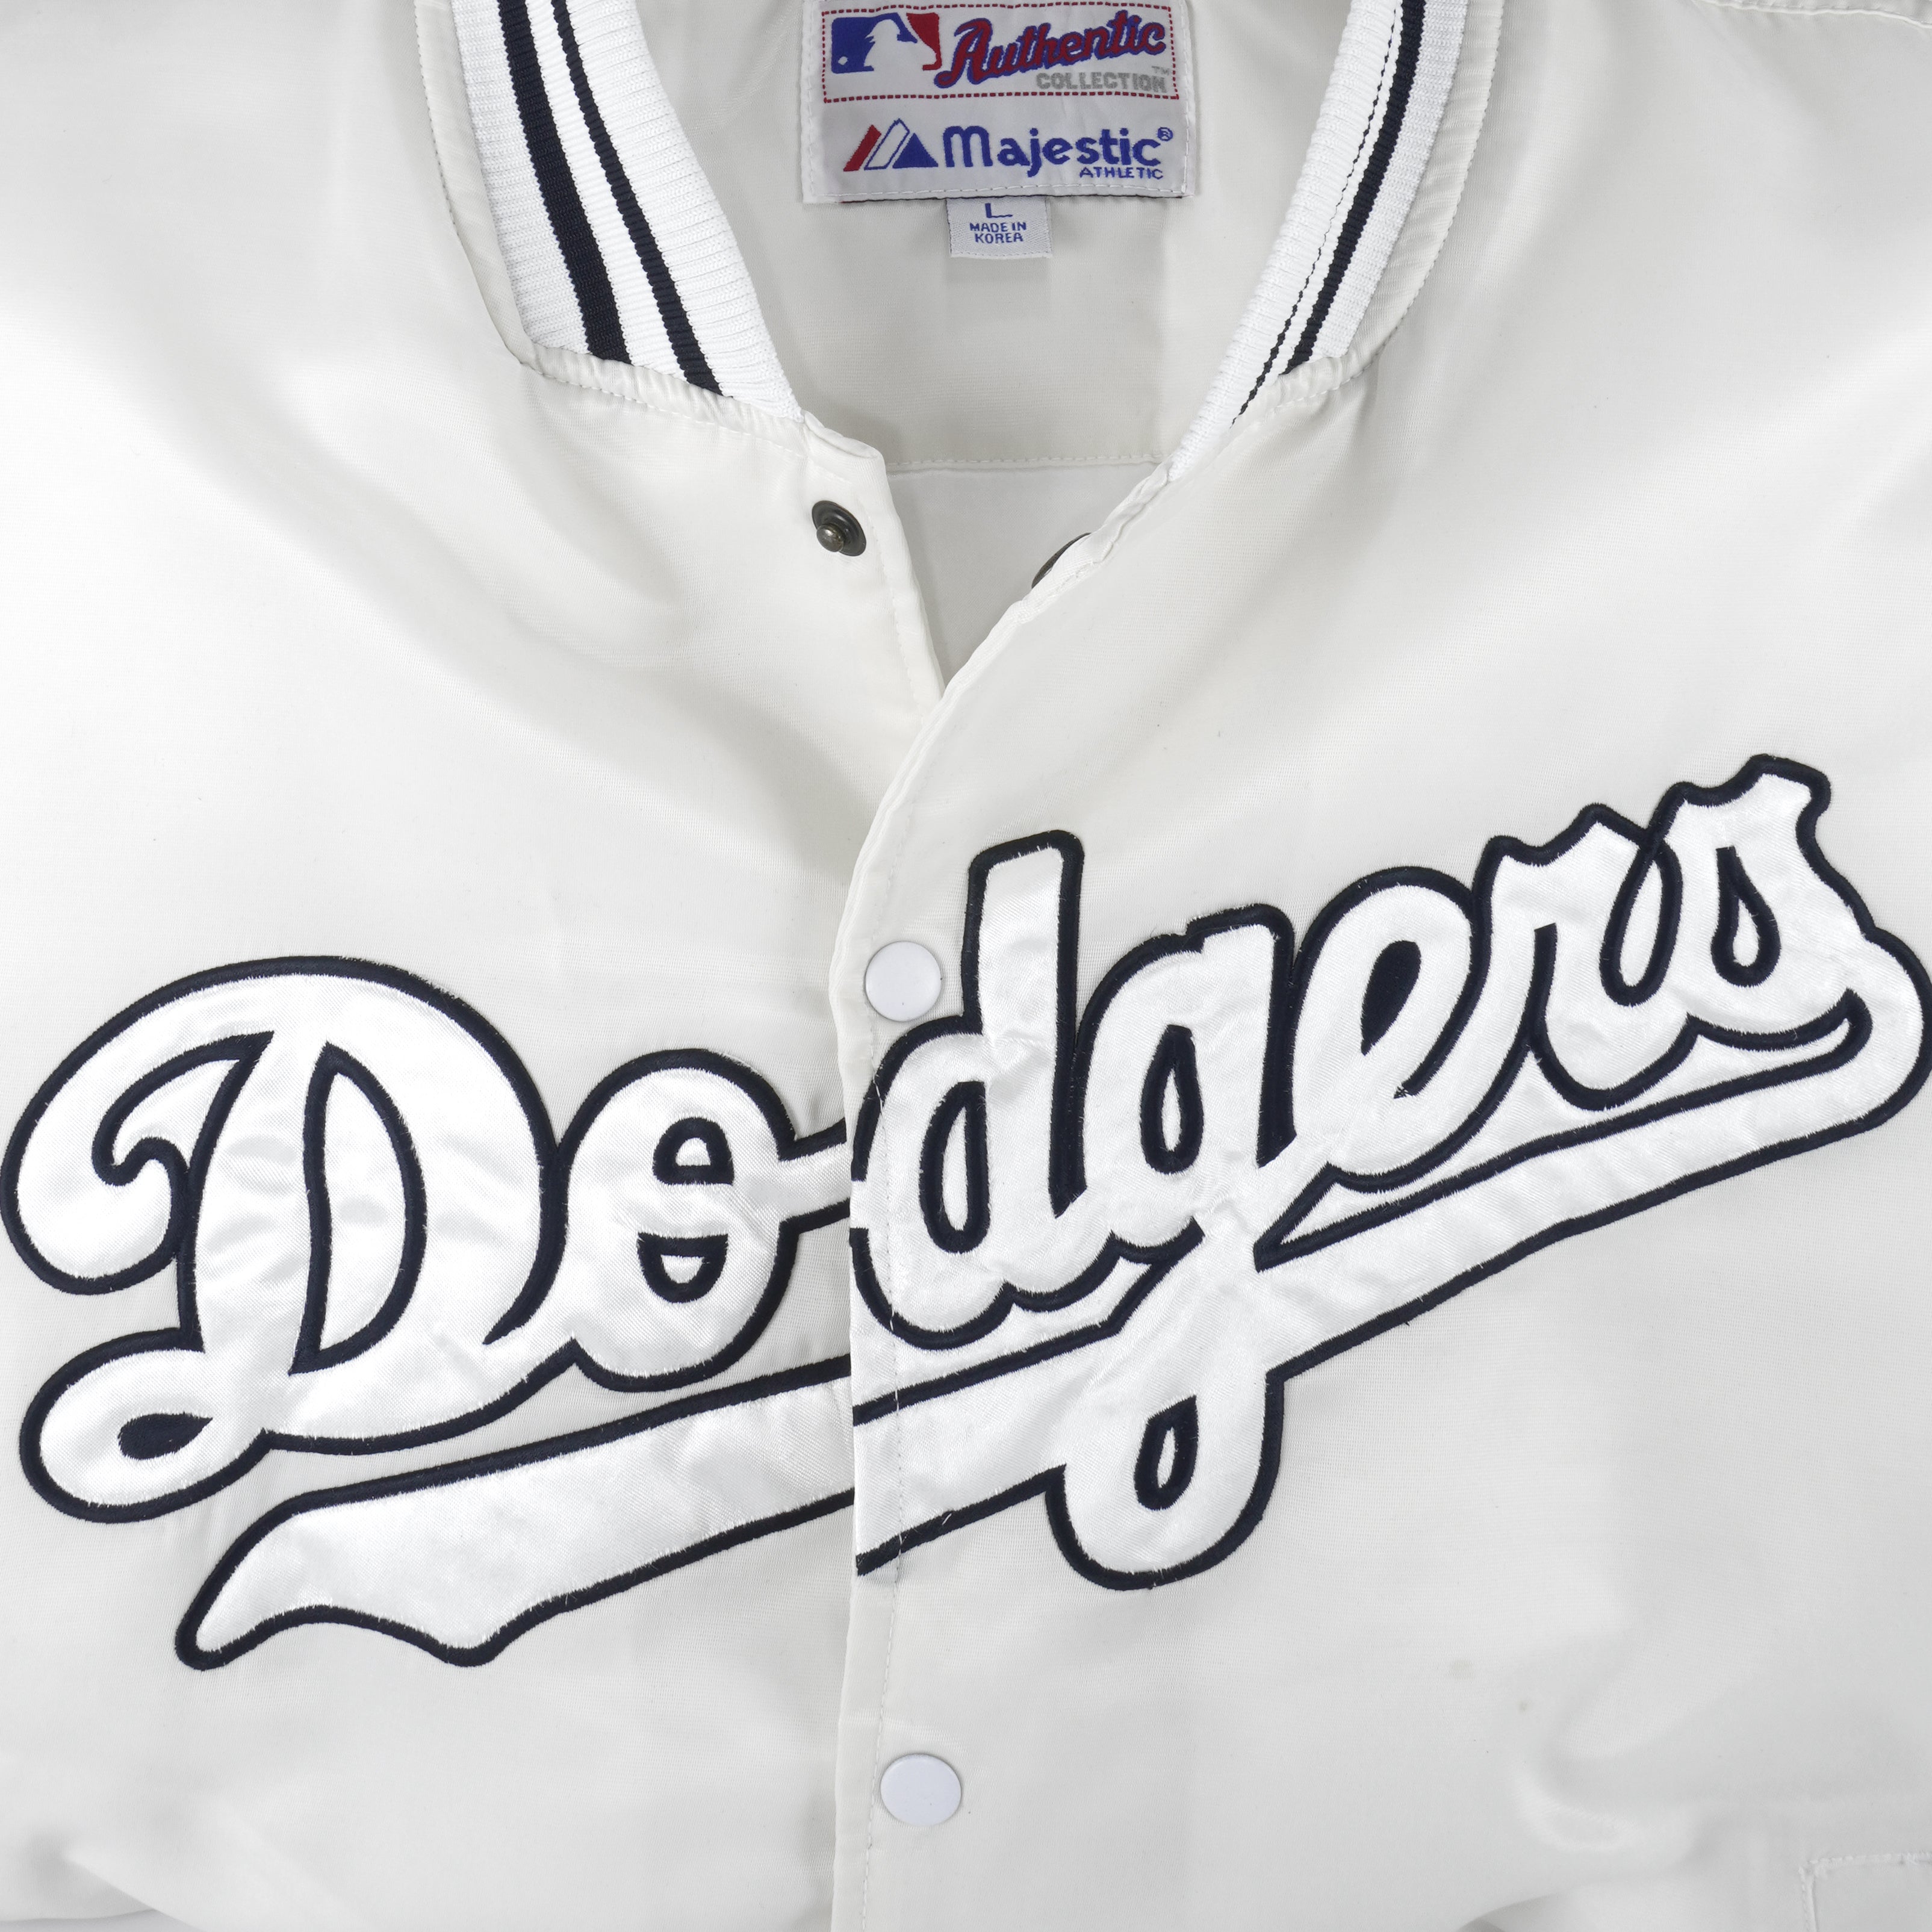 Mlb Los Angeles Dodgers Satin Button-up Jacket